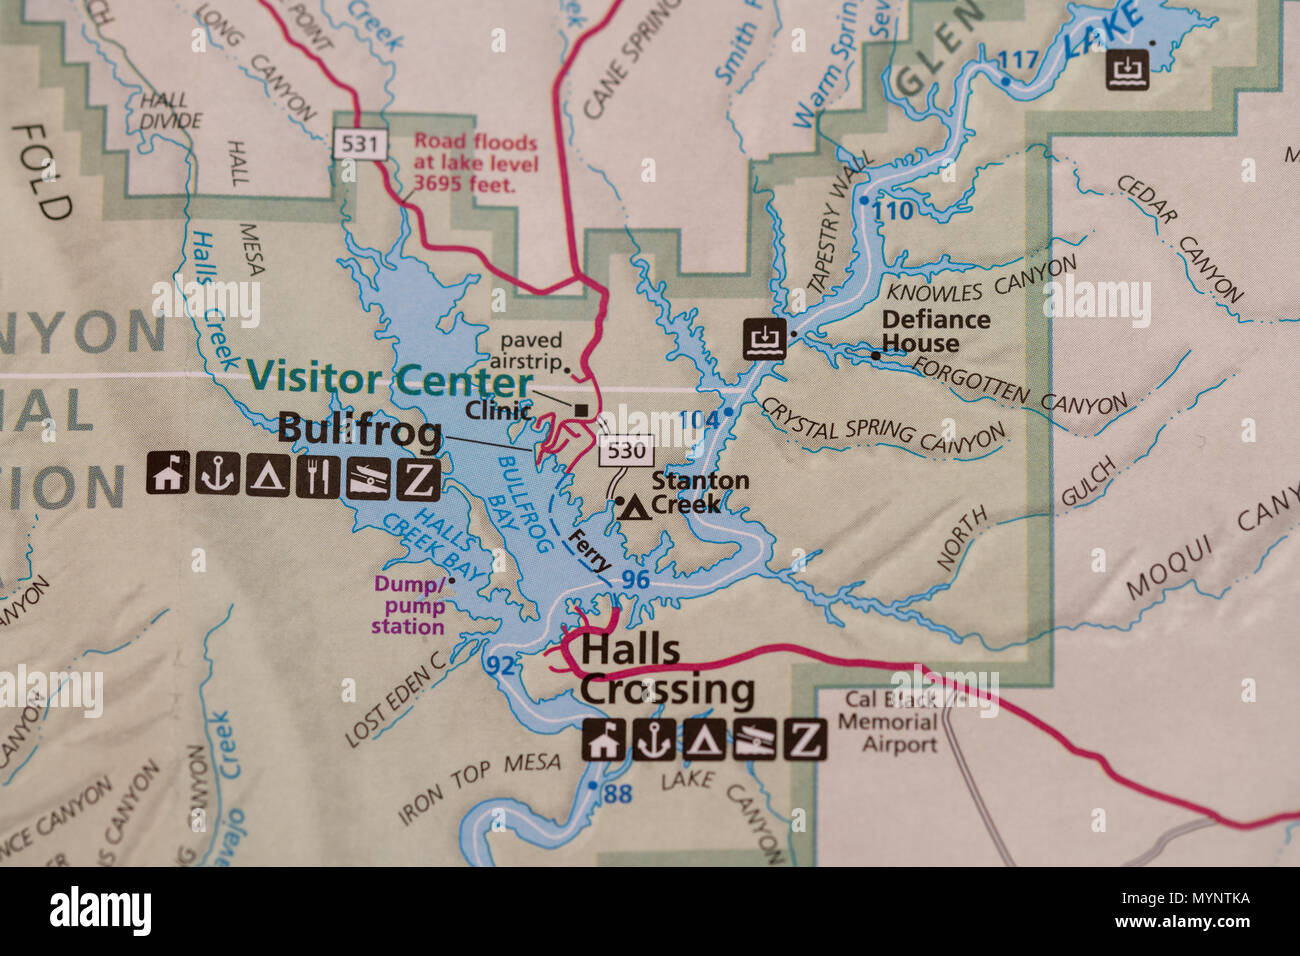 Travel planning accessories, trip to USA, Lake Powell area, map detail of Lake Powell, AZ Stock Photo